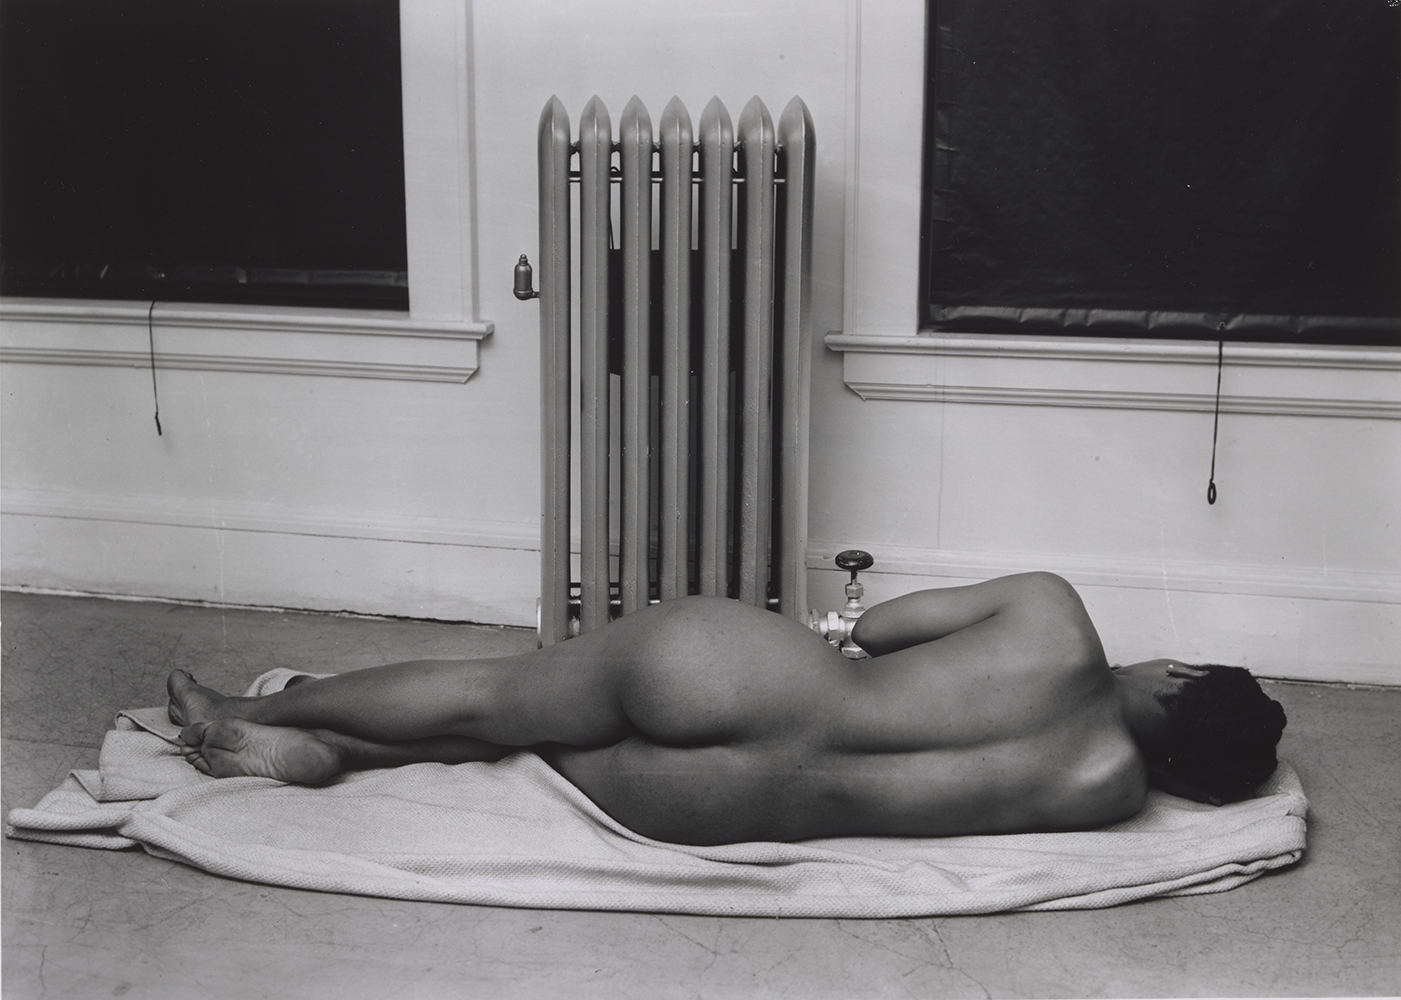 Photograph of a nude Black woman laying down on her side, back towards the viewer, in a sparse room in front of a hot water radiator